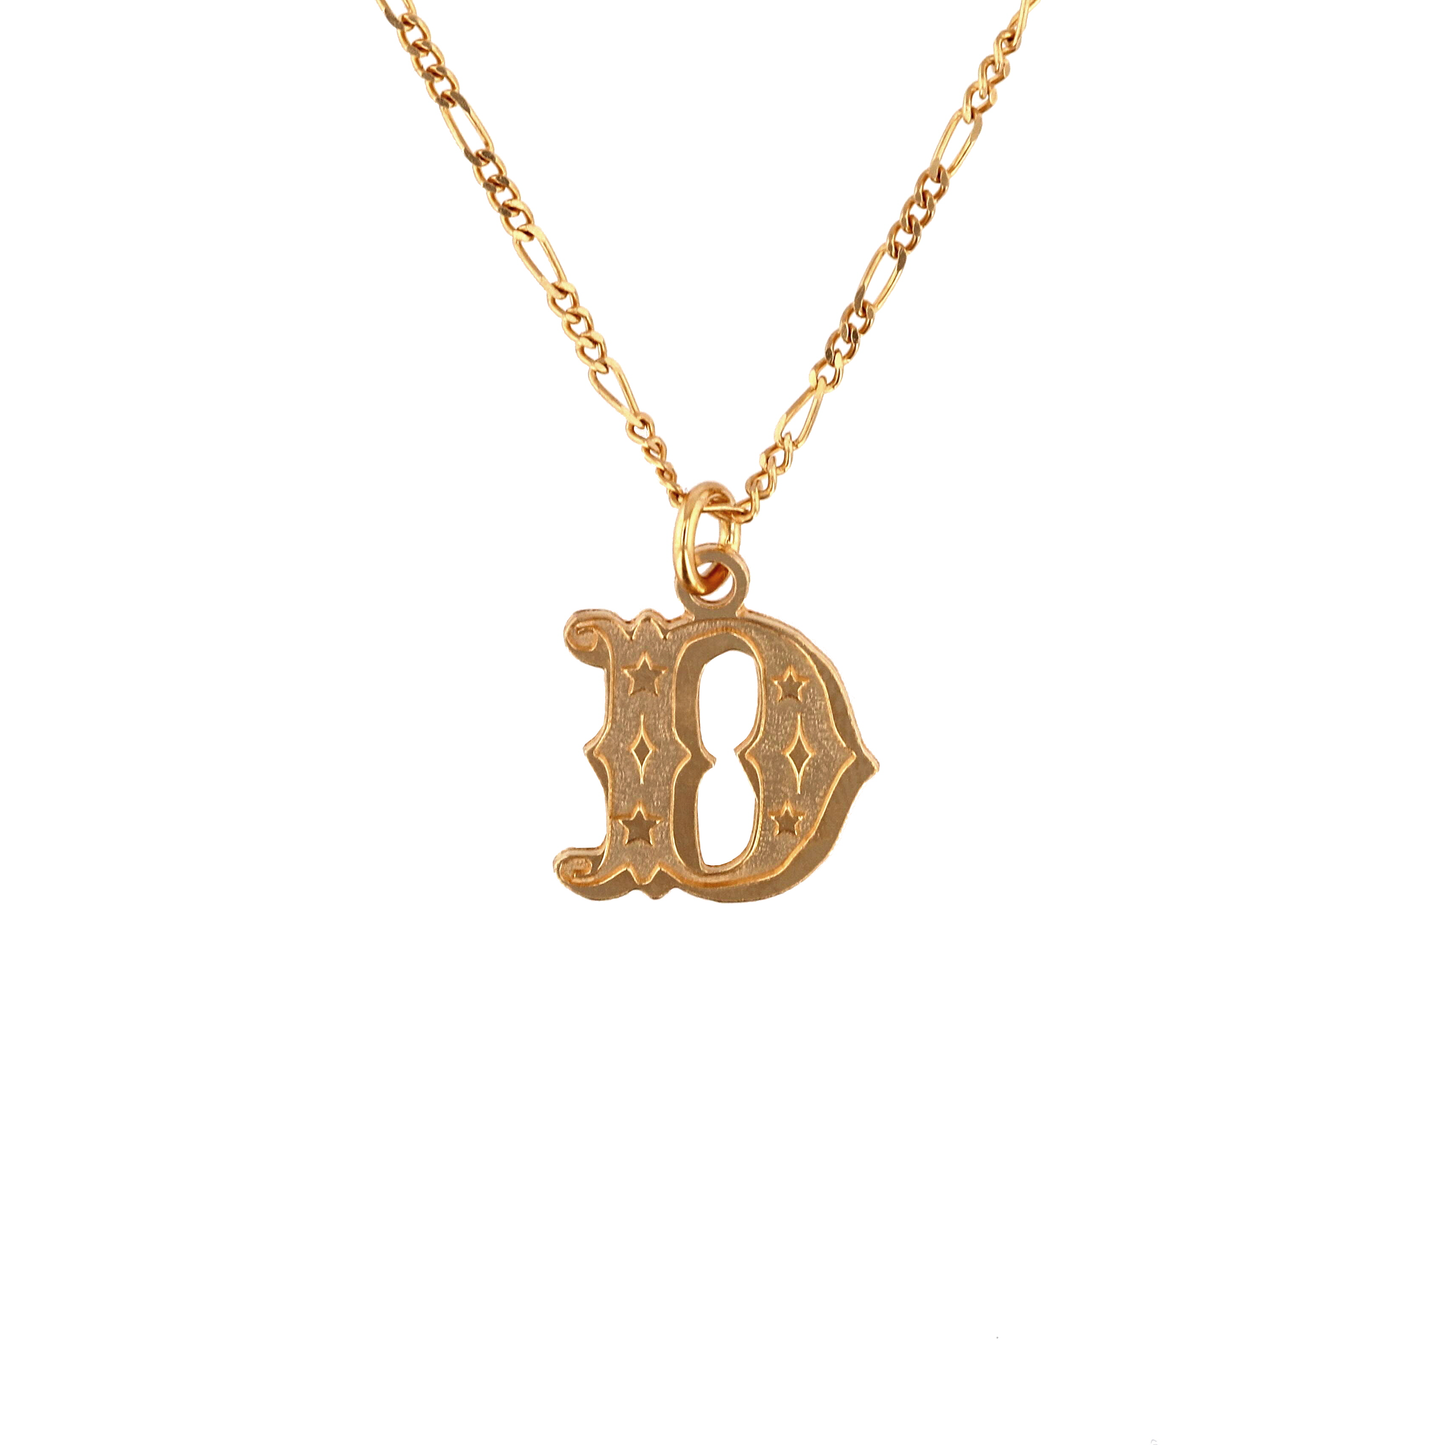 Circus Alphabet Large Necklace -Gold Plated